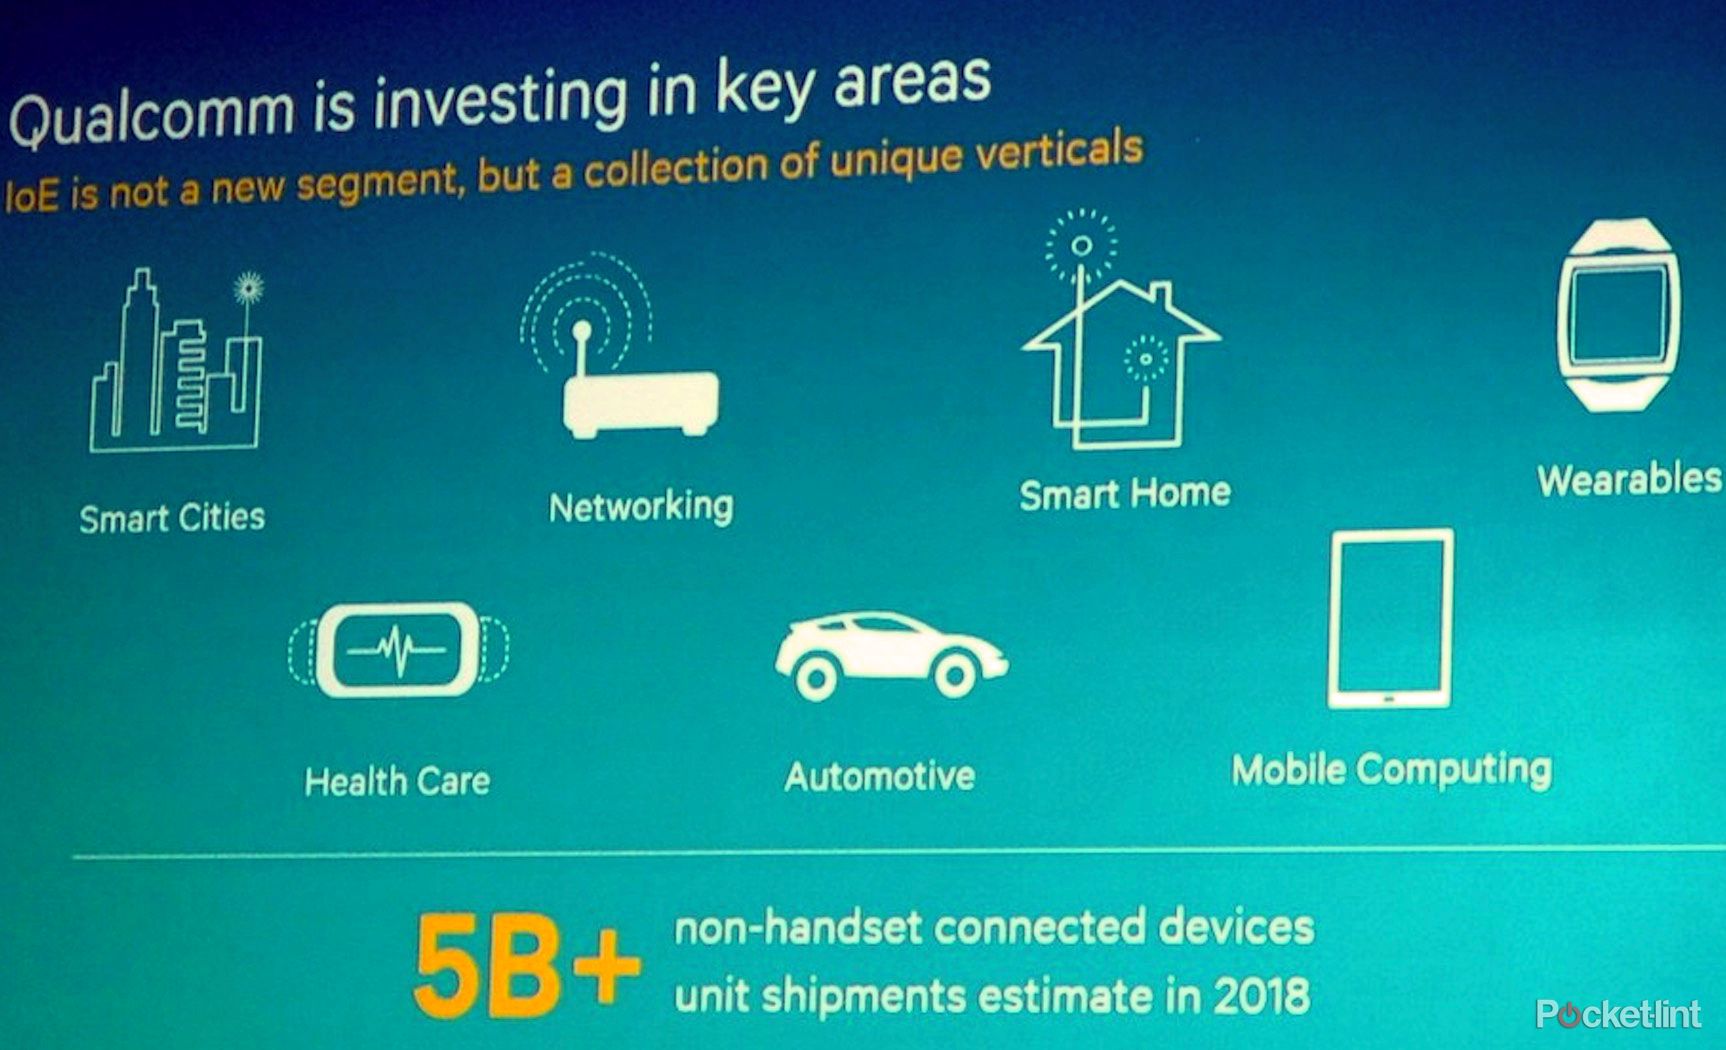 qualcomm wants to mirror snapdragon success in your home car and the city you live image 4